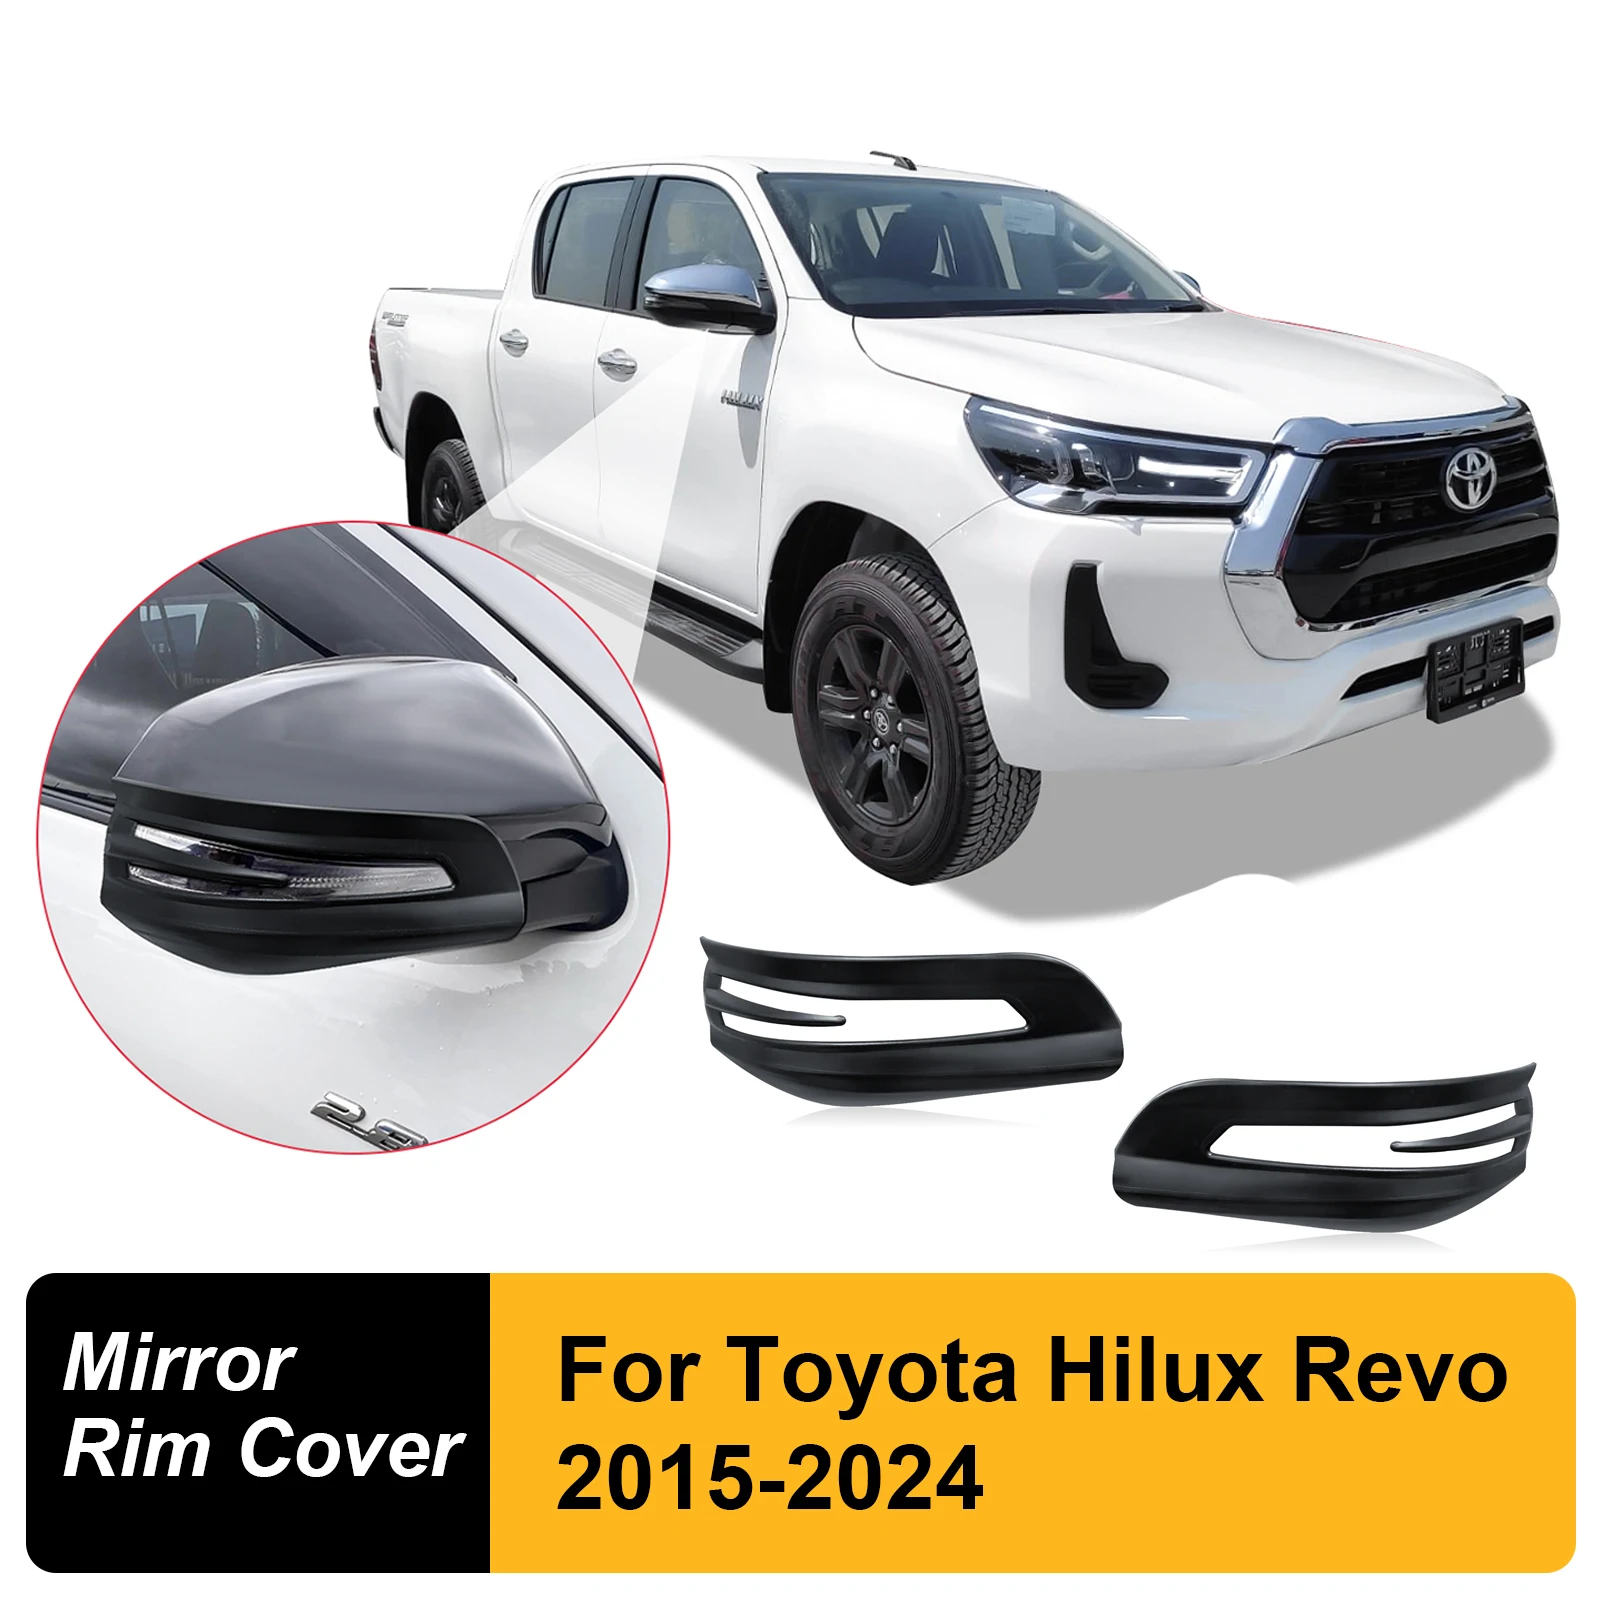 

2PCS ABS Side Mirror Trim Strip Fit For Toyota Hilux Revo 2015-2024 Year All Models 4X4 Car Accessories Matte Black Car Styling